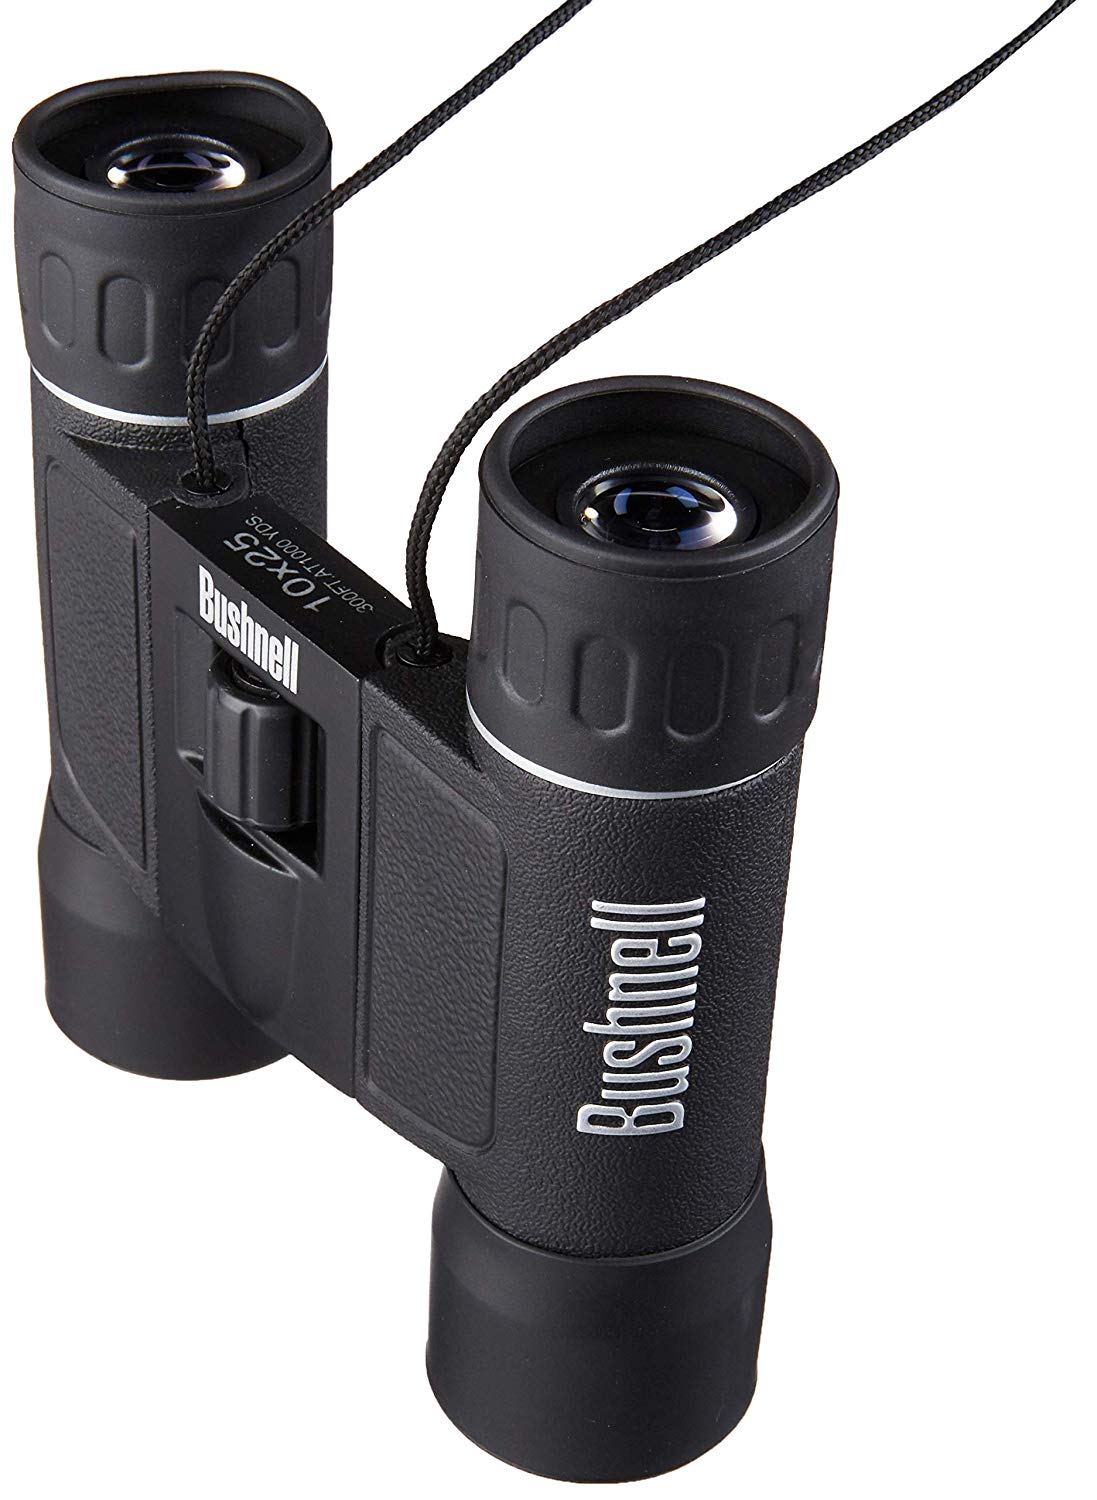 Bushnell Powerview Roof Prisms 8 x 21 Best Binoculars In India